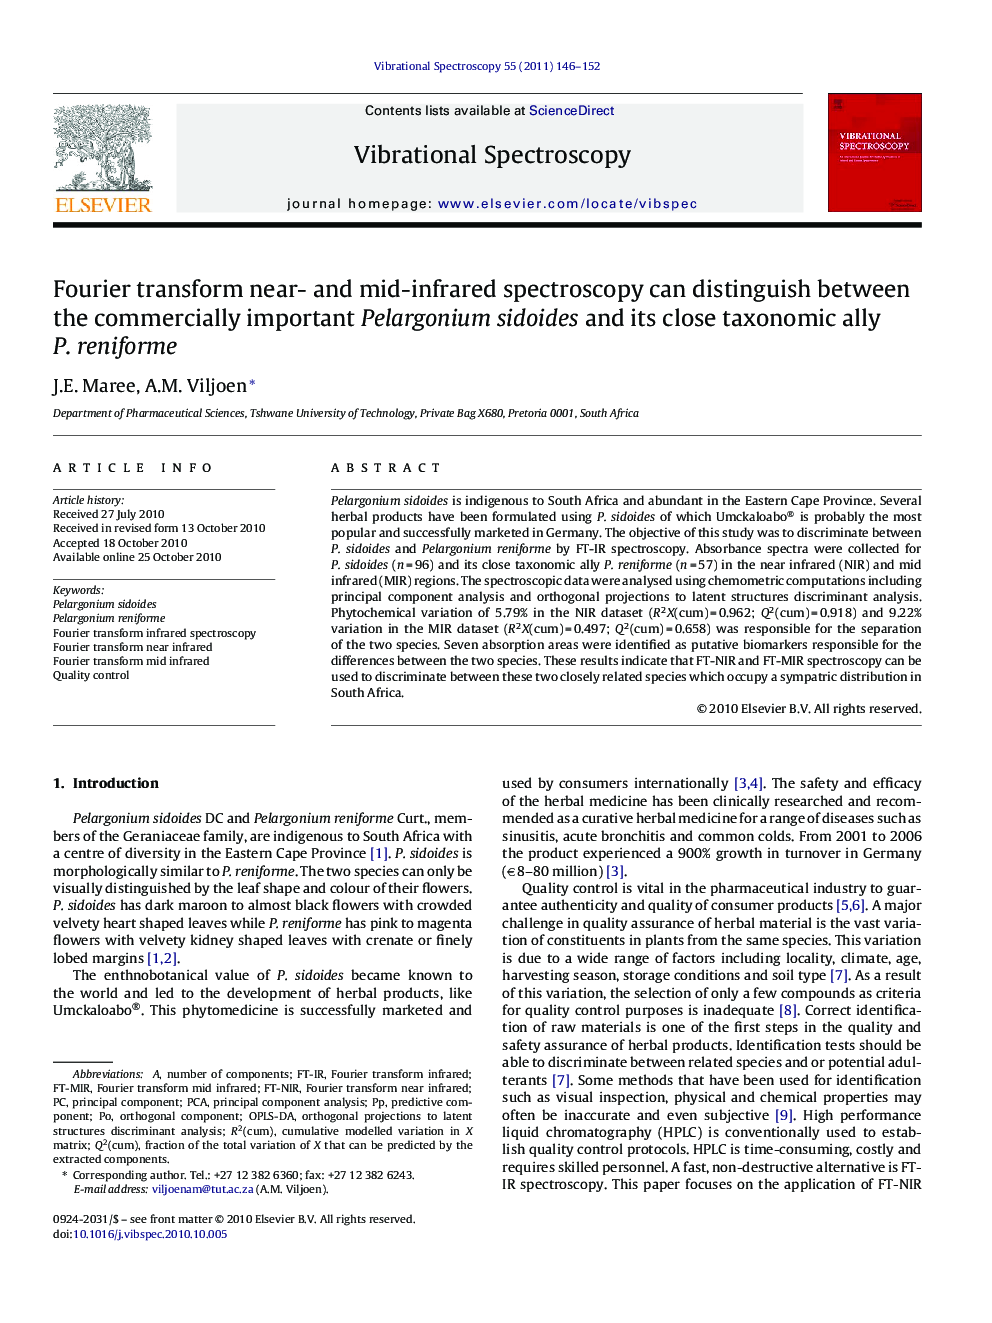 Fourier transform near- and mid-infrared spectroscopy can distinguish between the commercially important Pelargonium sidoides and its close taxonomic ally P. reniforme